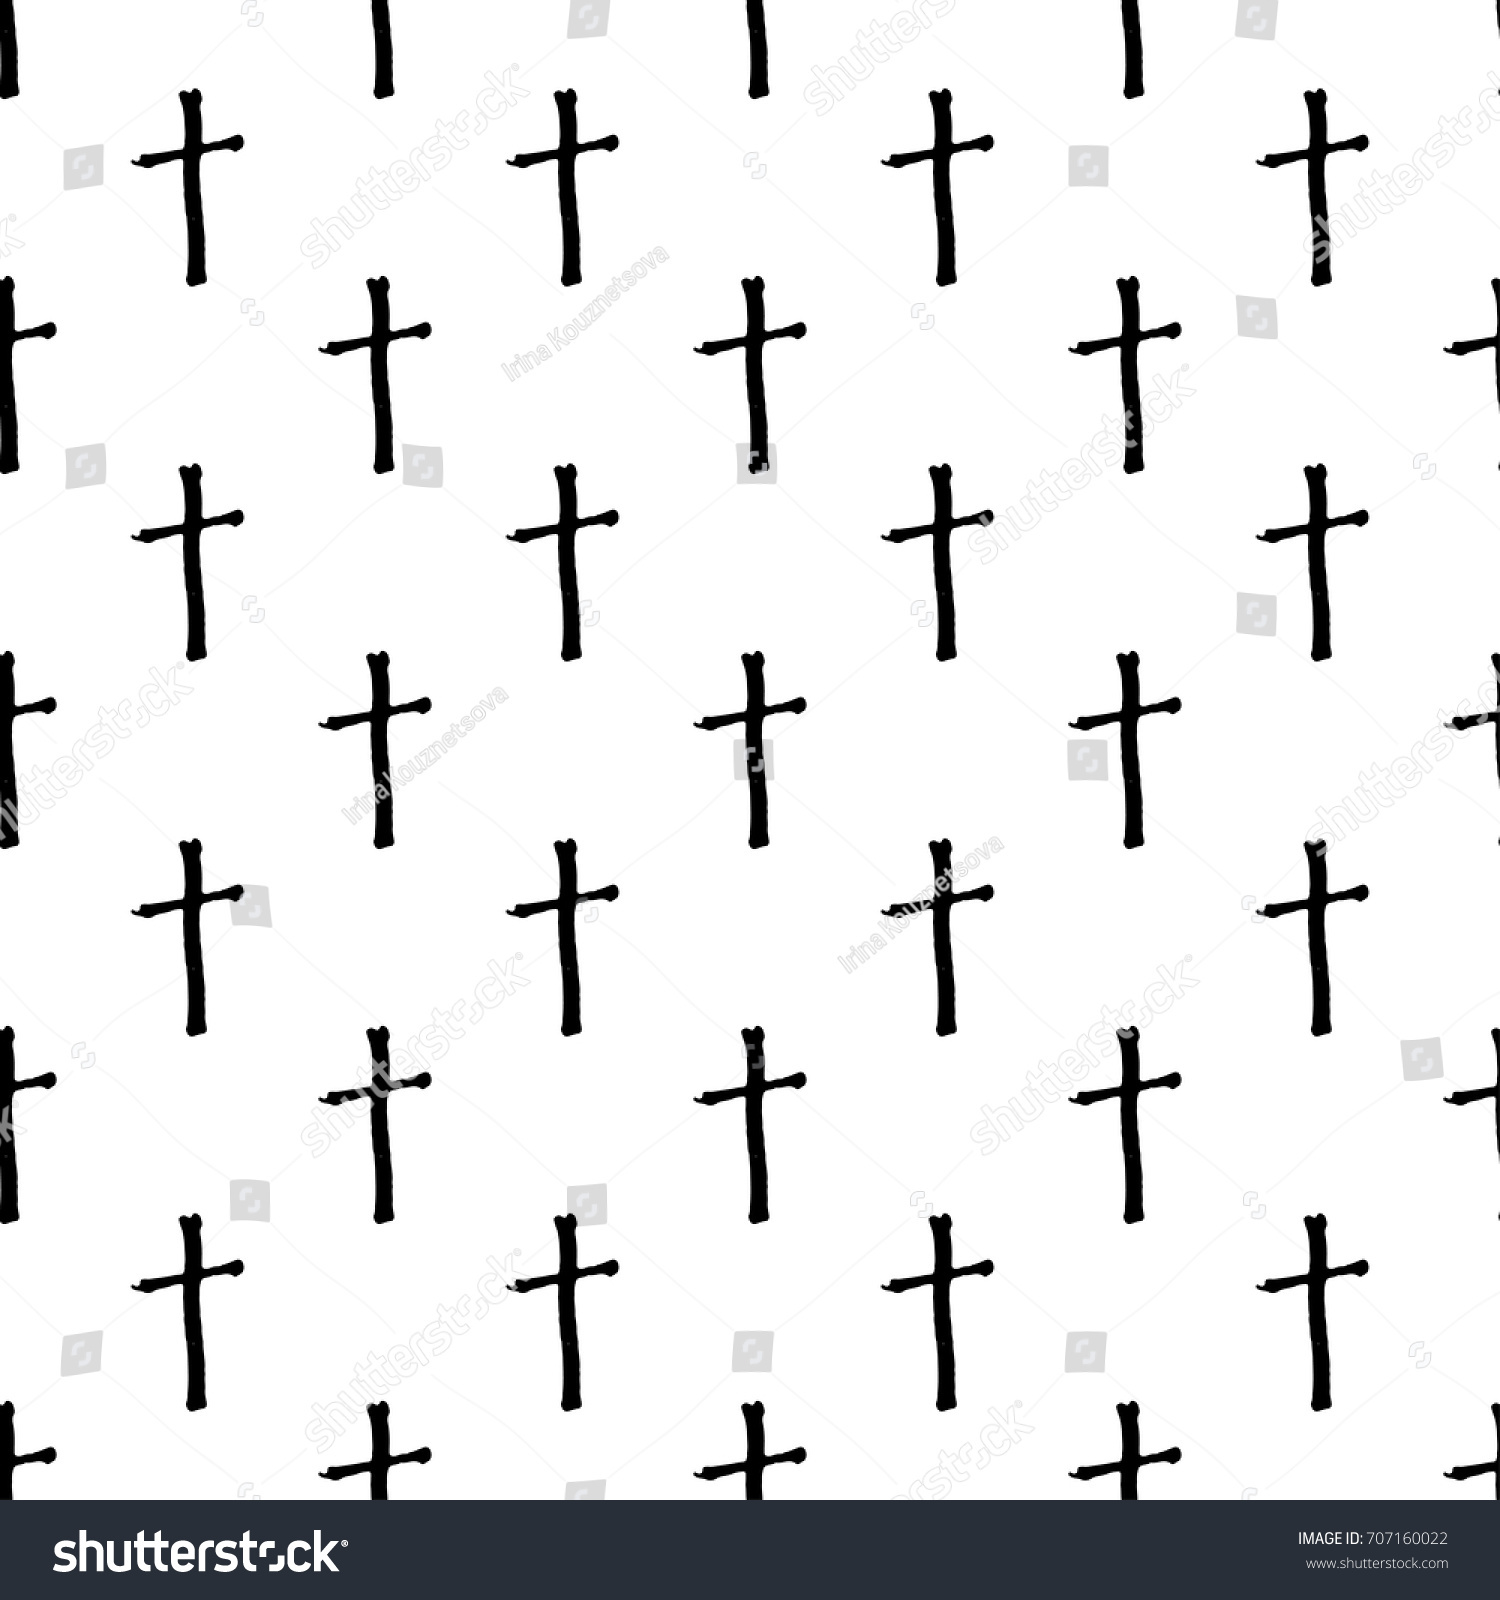 Vector Hand Drawn Grunge Seamless Pattern Stock Vector (Royalty Free ...